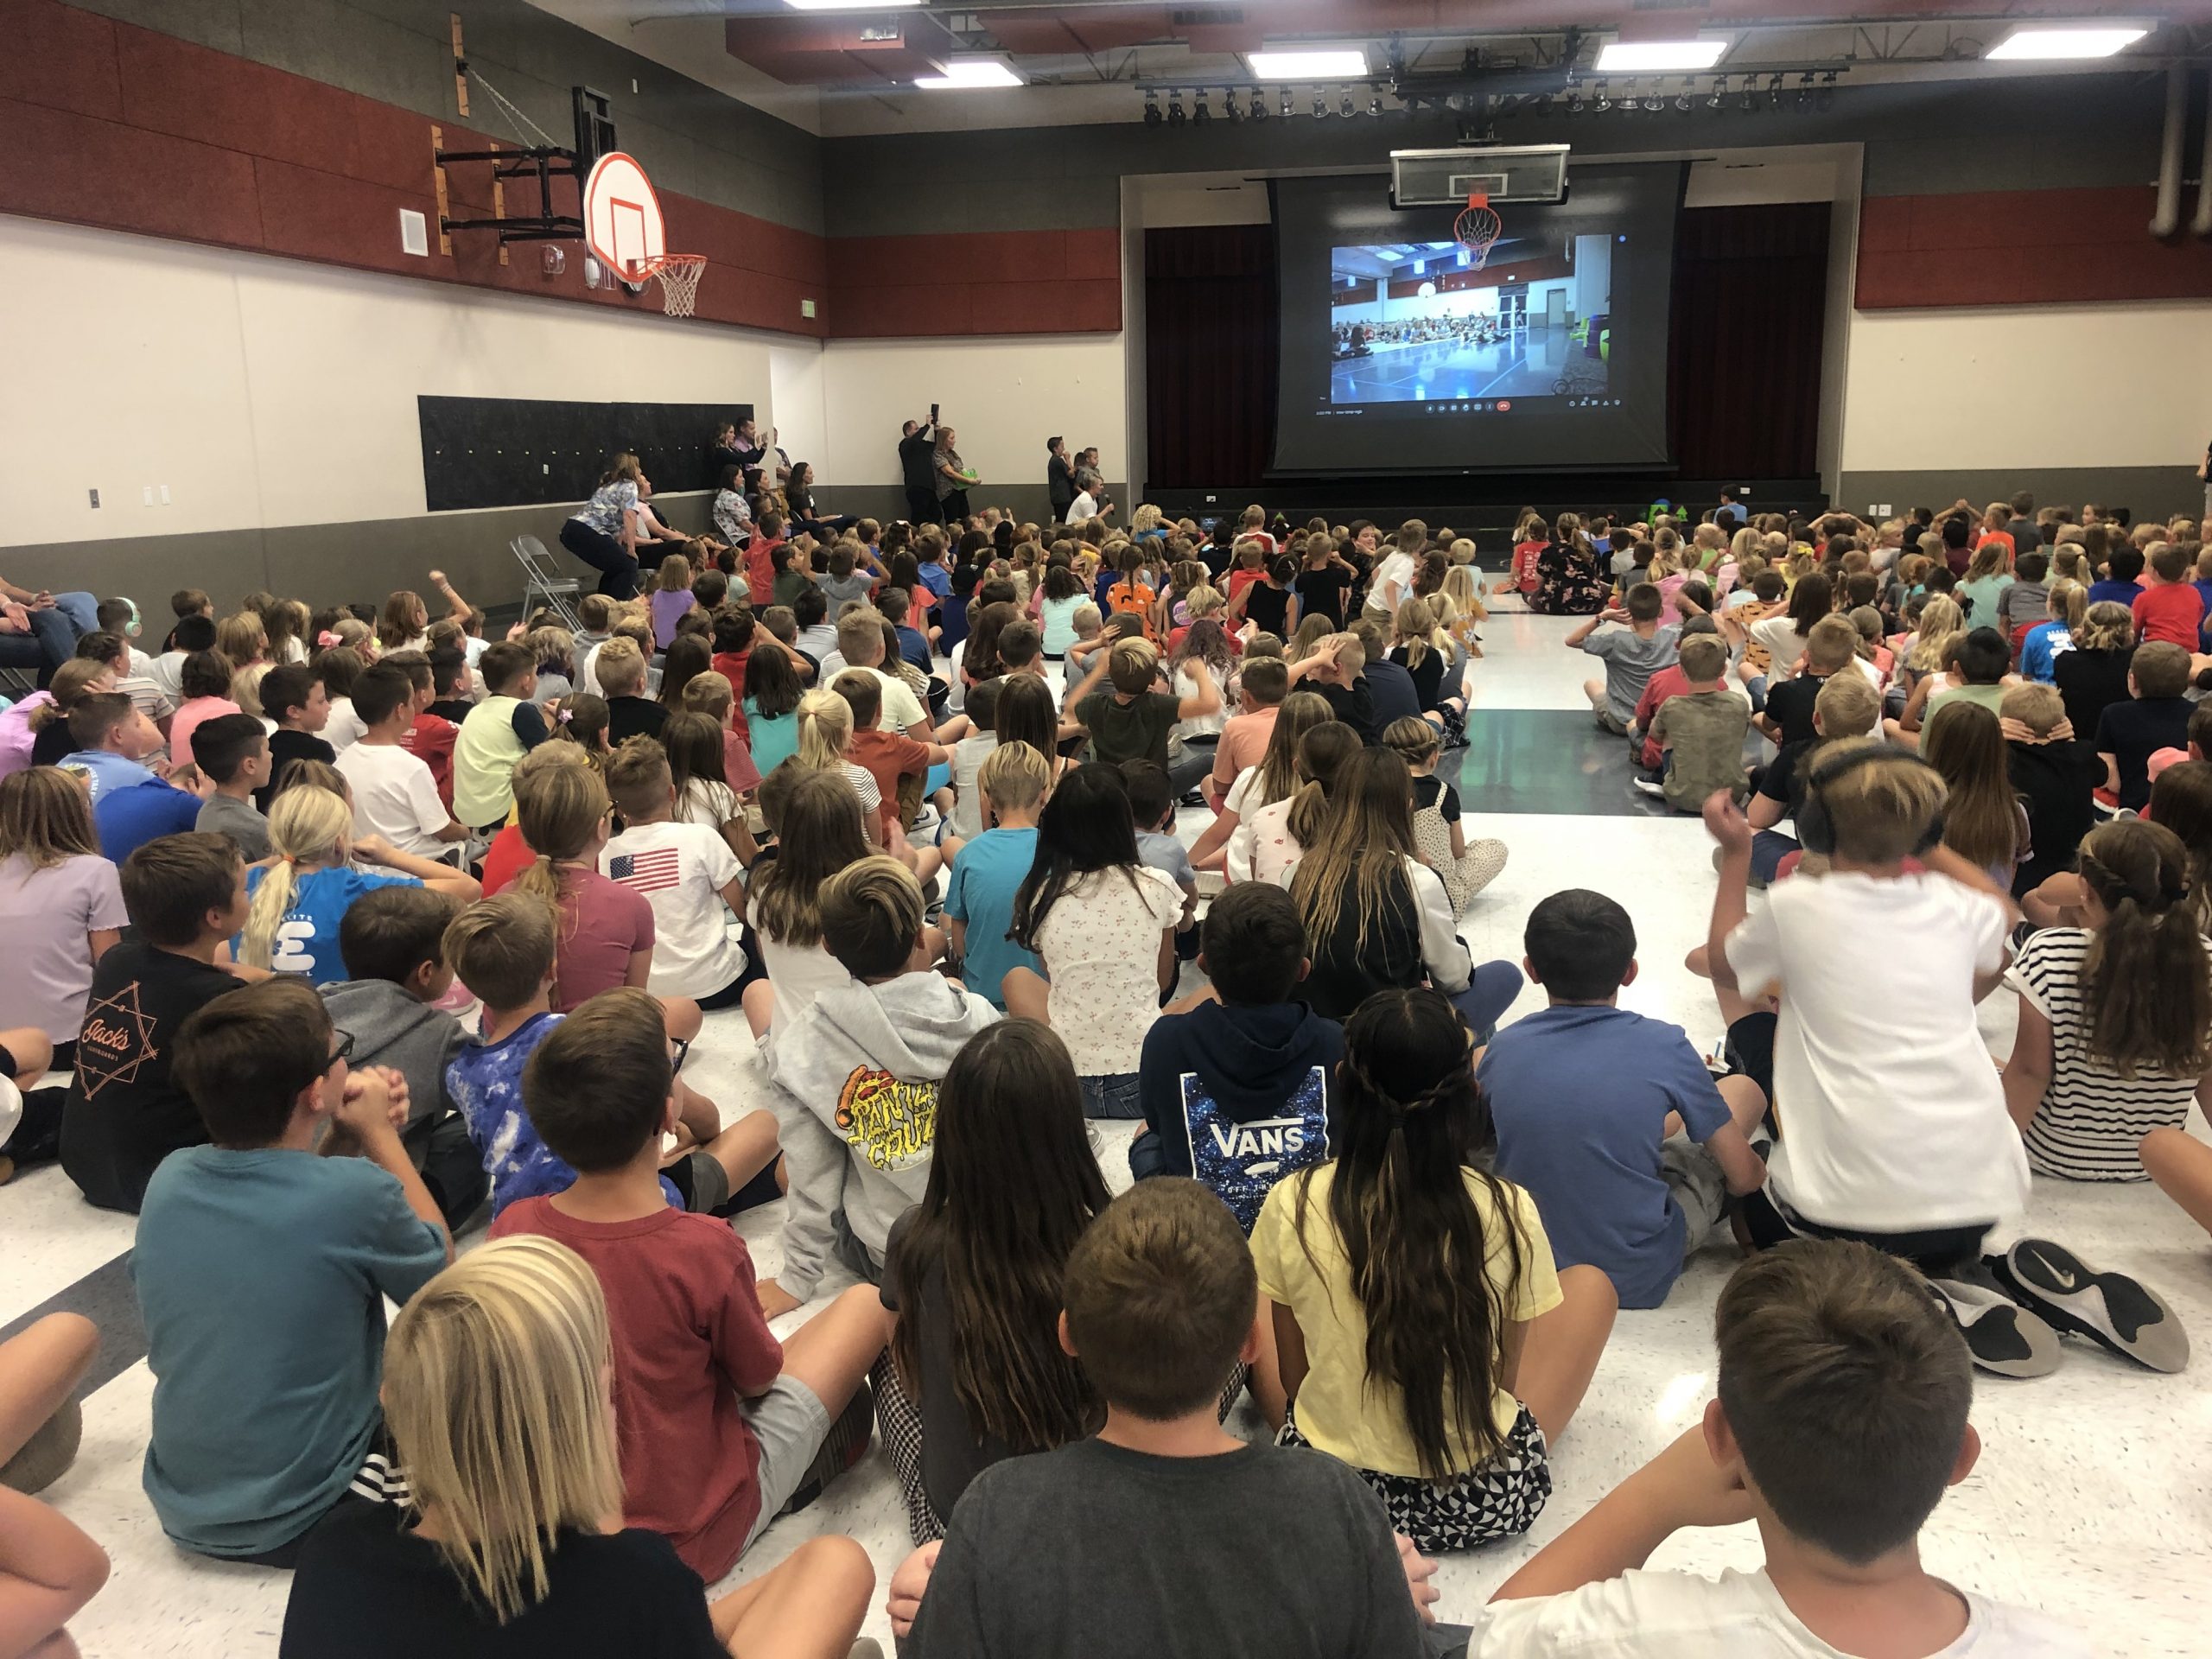 Students watching a stem boat race on a big screen